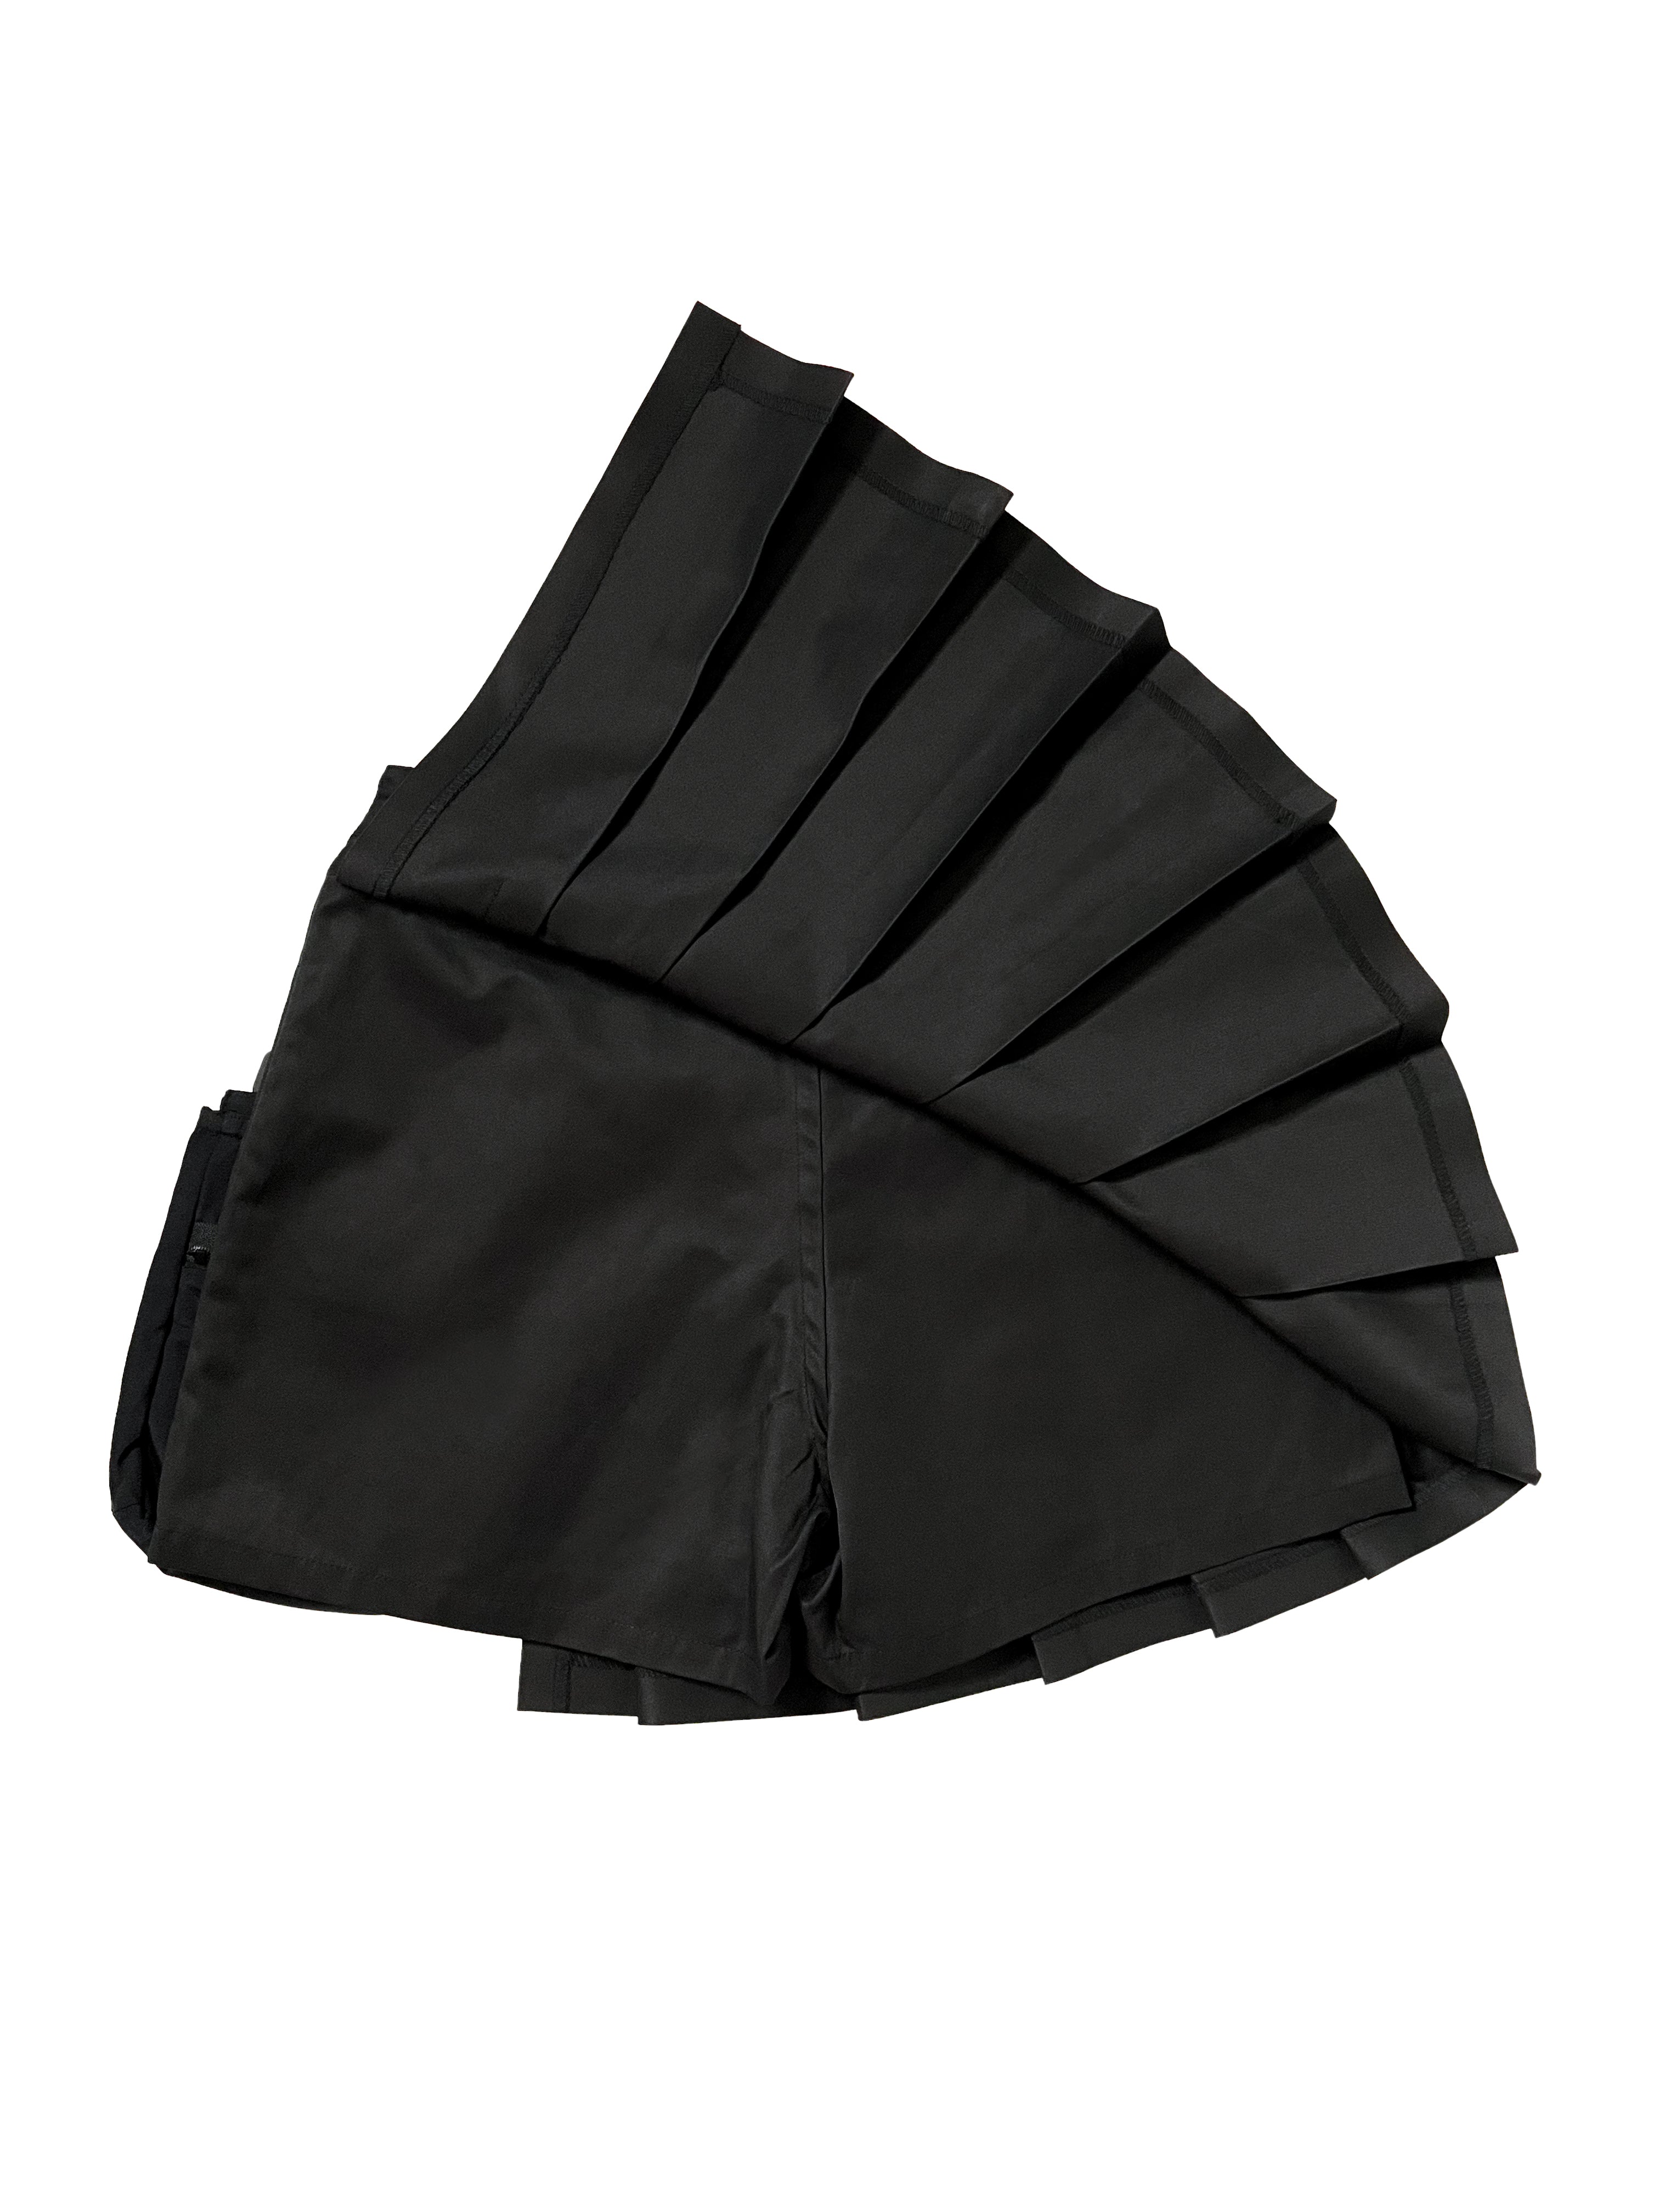 Corruption Arc Pleated Skirt (Inset Shorts) With Pouch